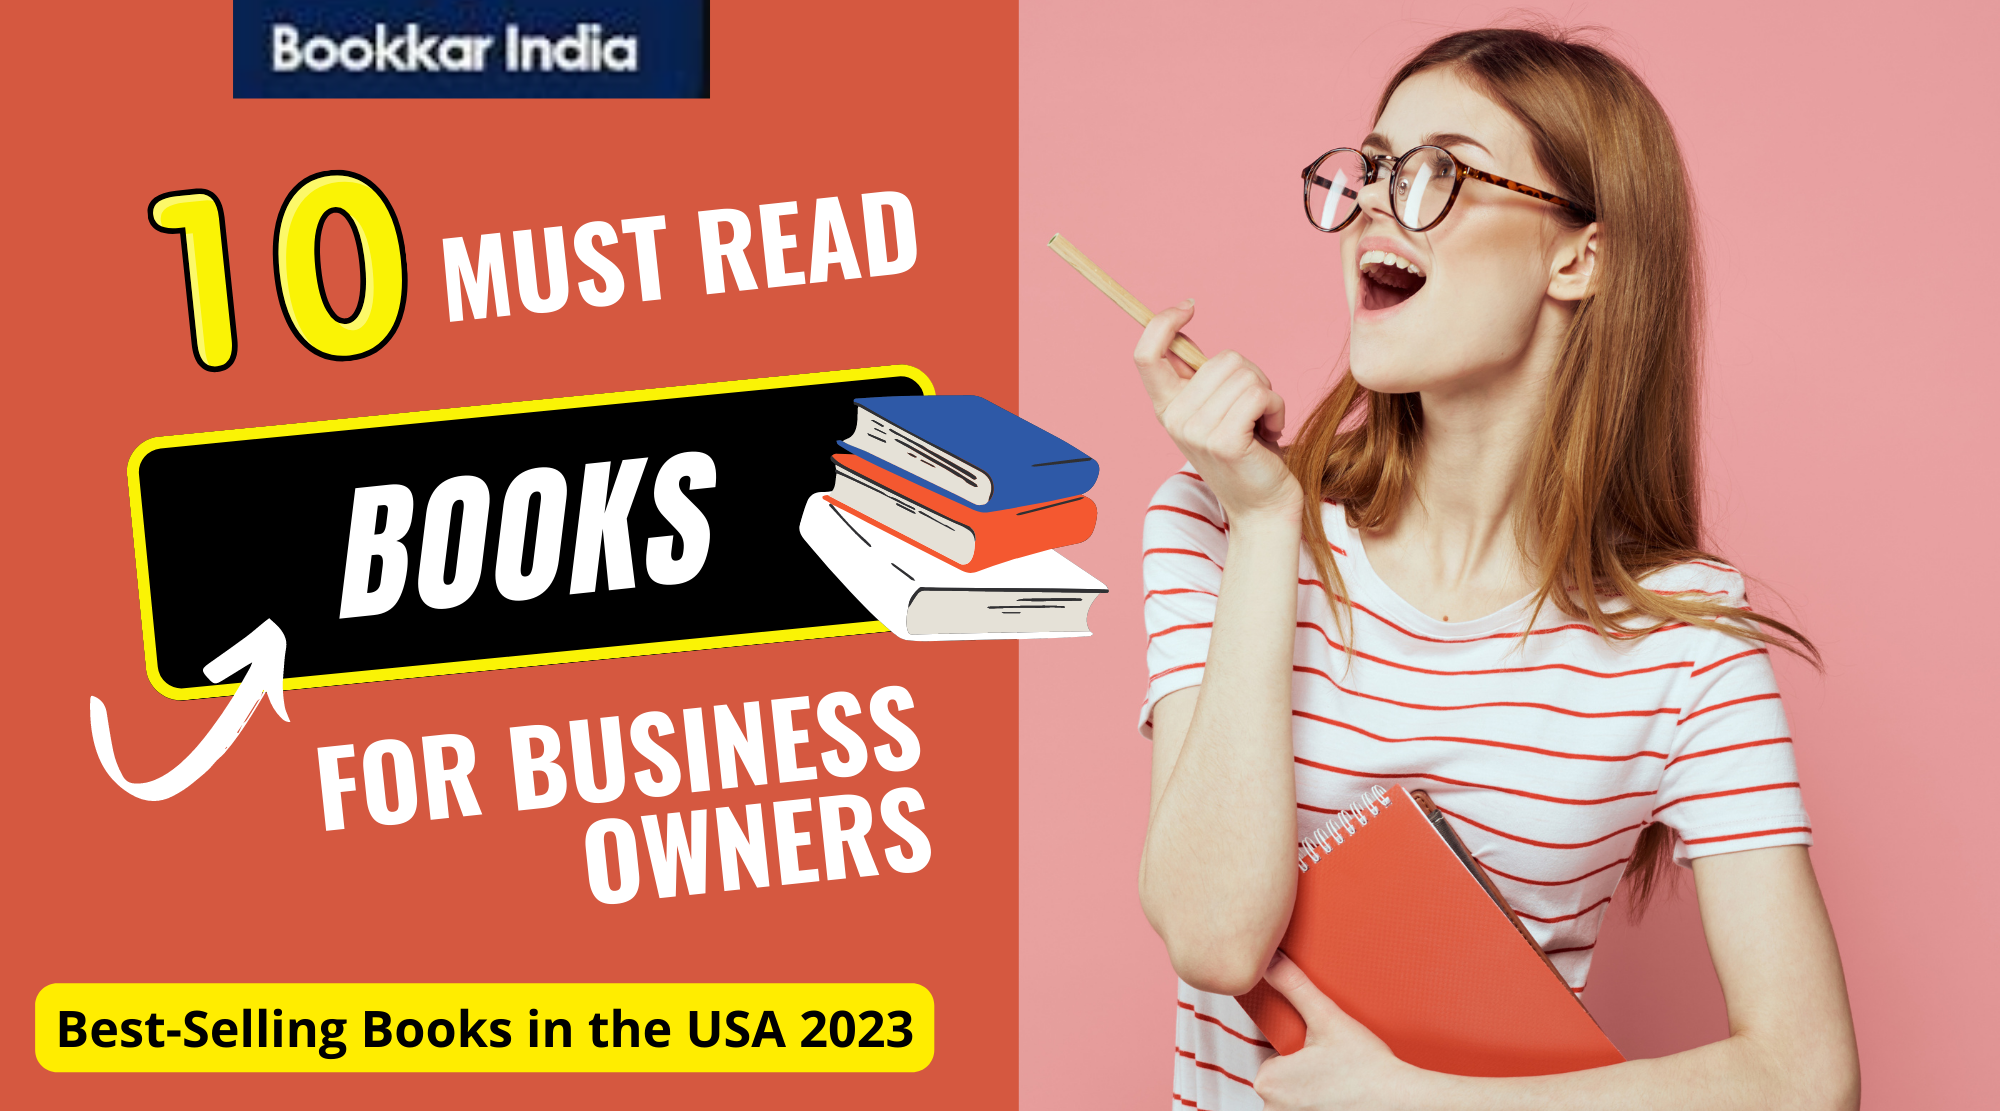 Best-Selling Books in the USA 2023